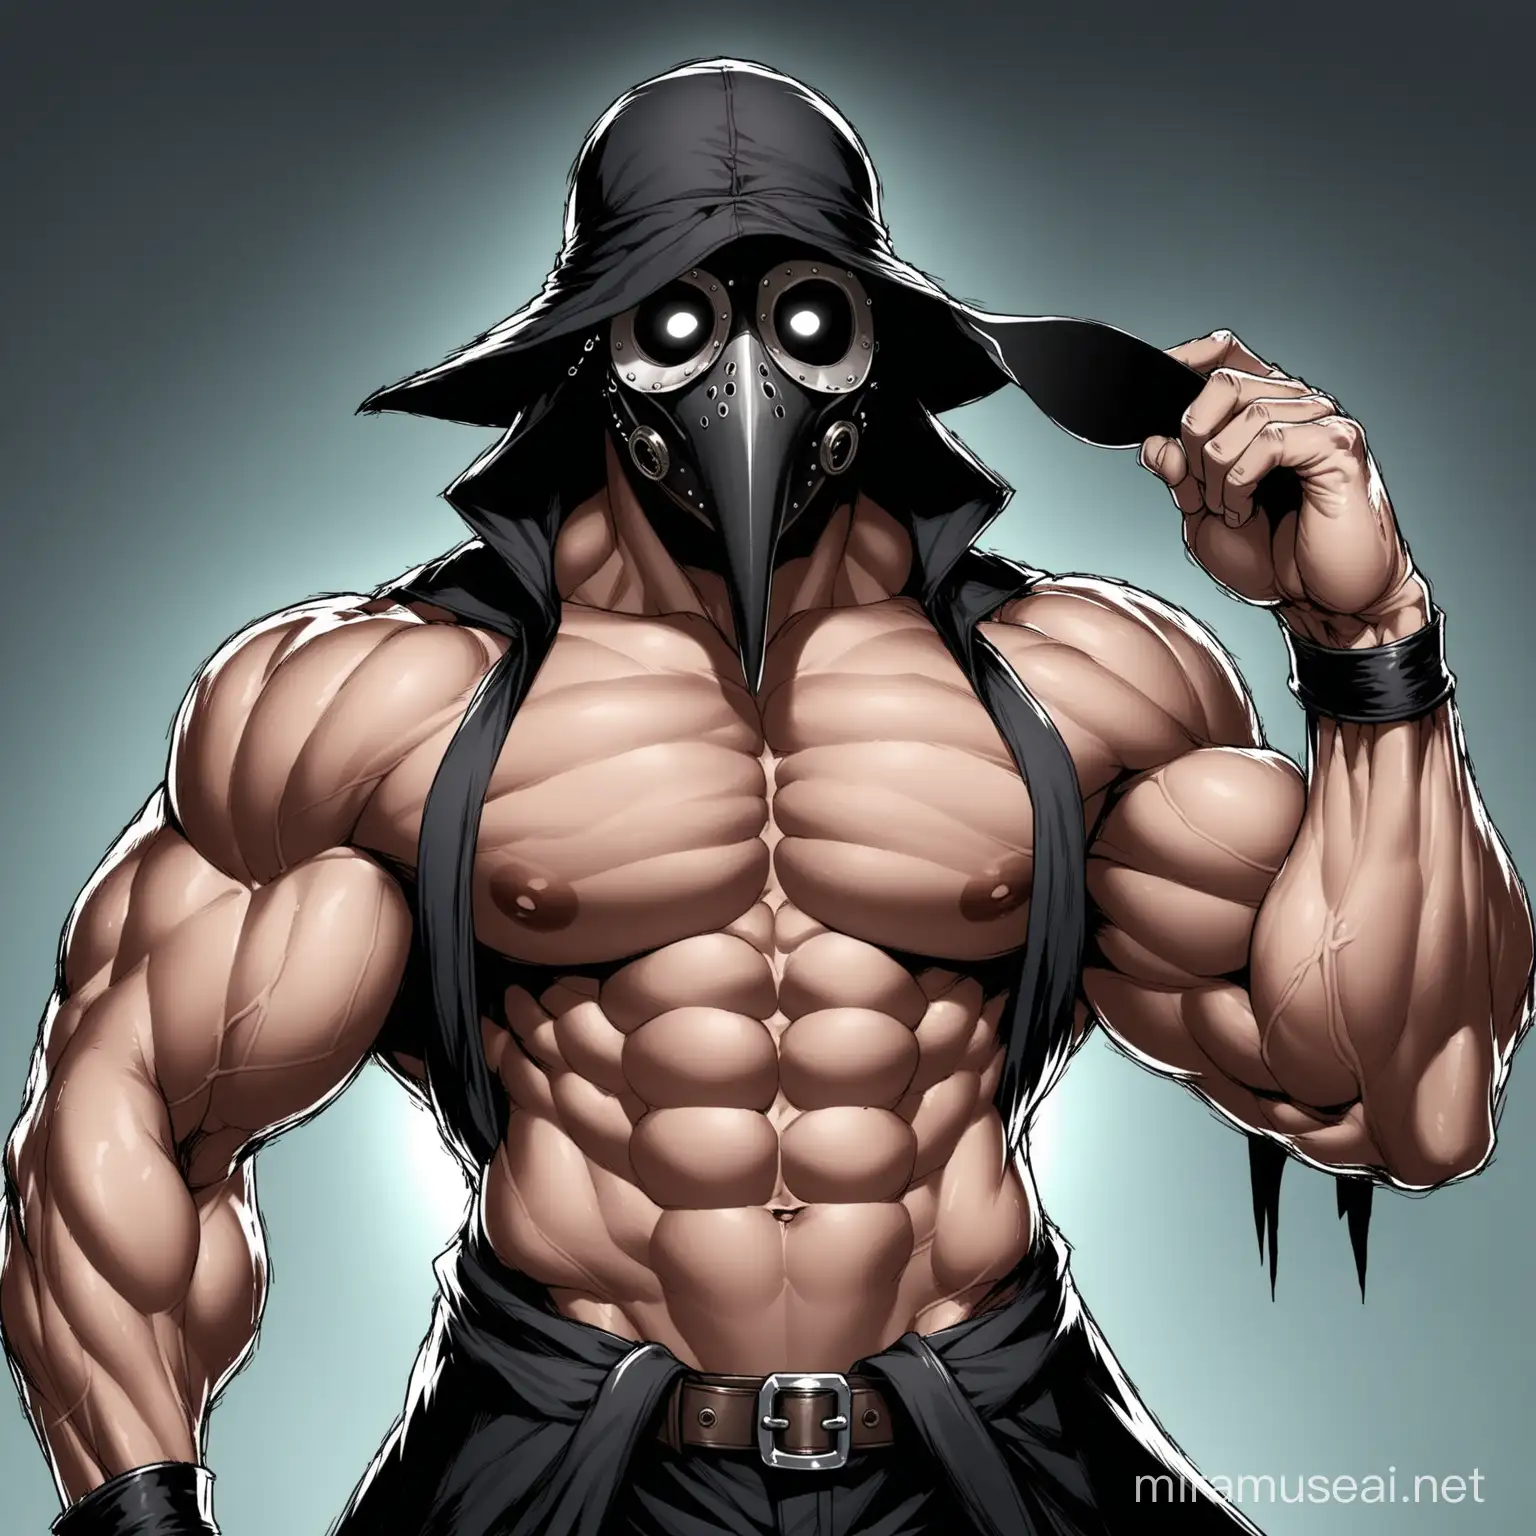 Muscular Wizard in Plague Doctor Mask Displaying Toned Physique